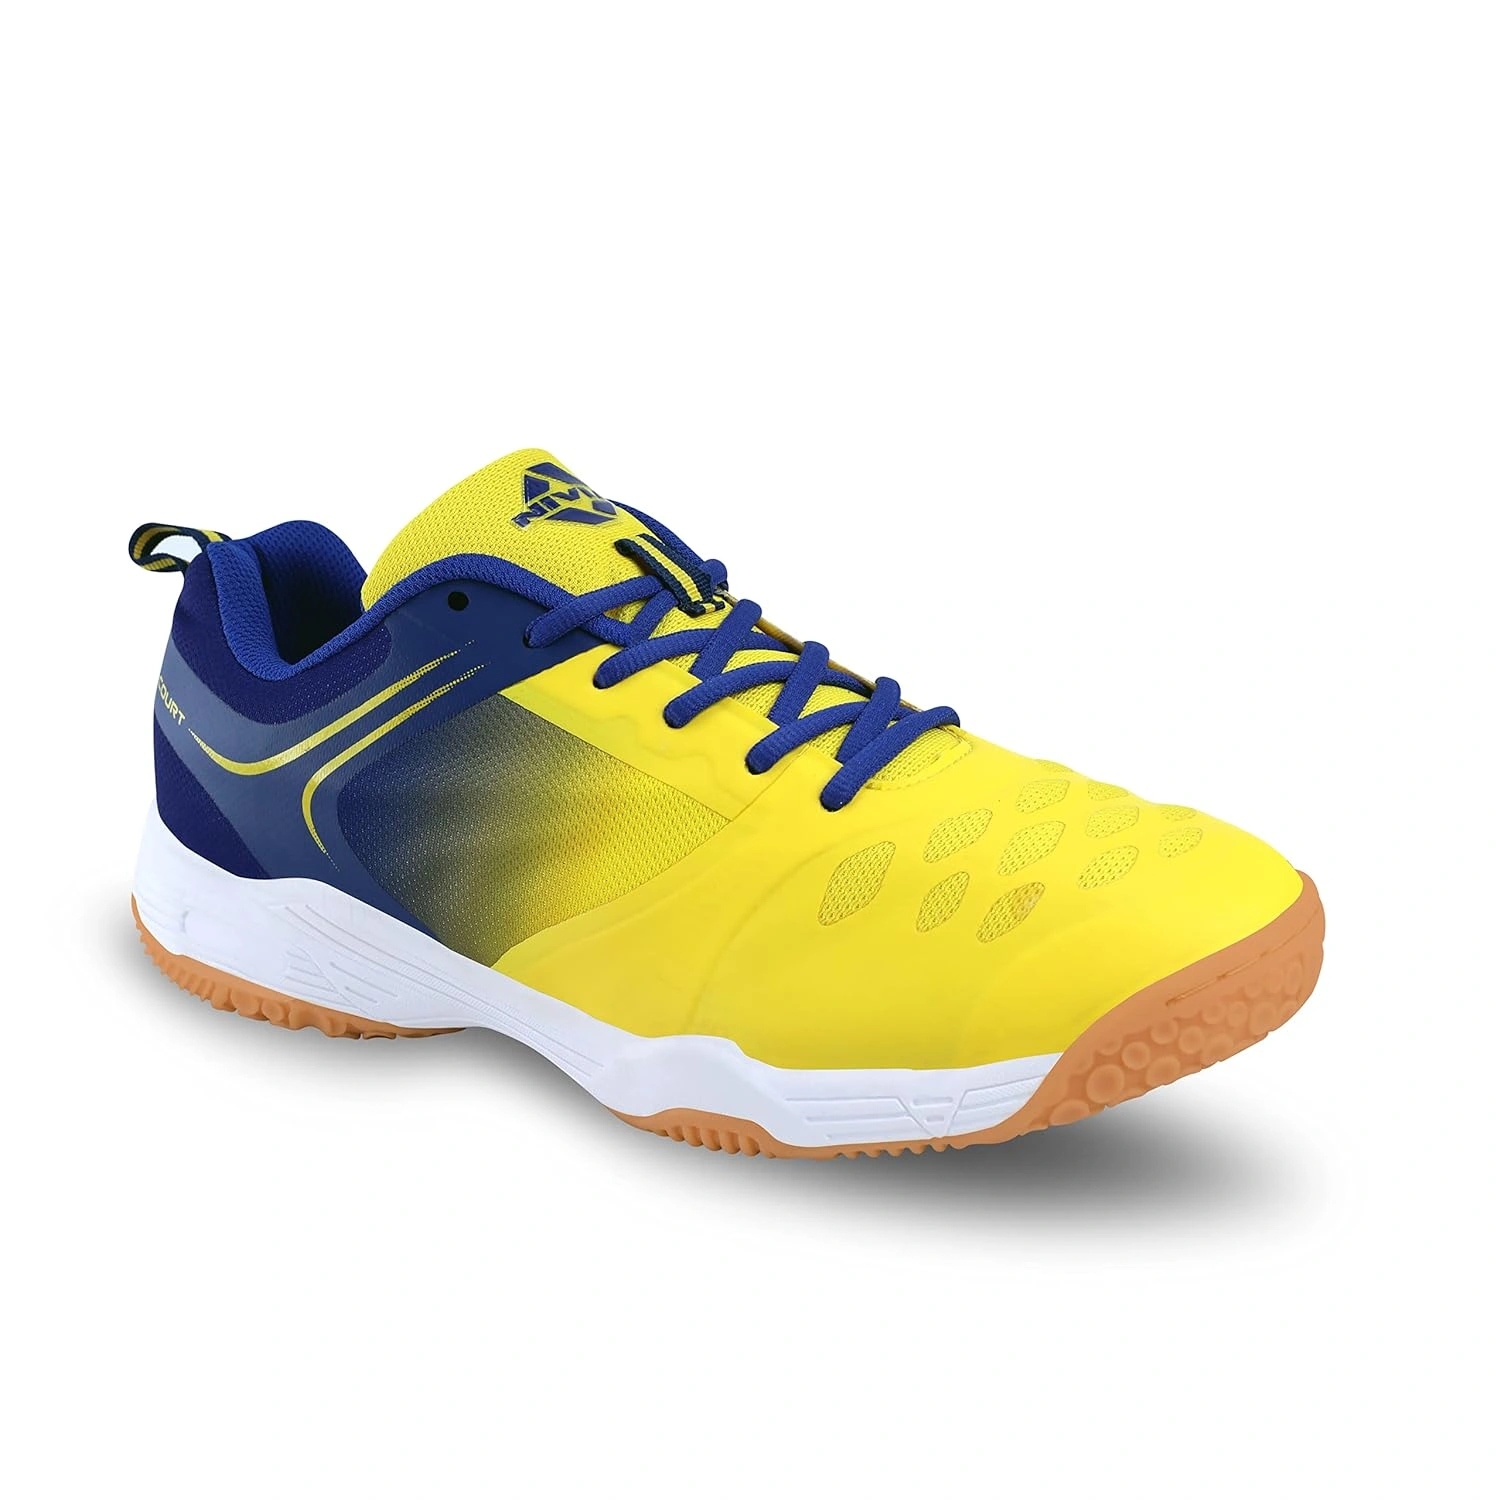 Nivia Hy-court 2.0 Badminton Shoes For Mens-YELL/ BLUE-11-1